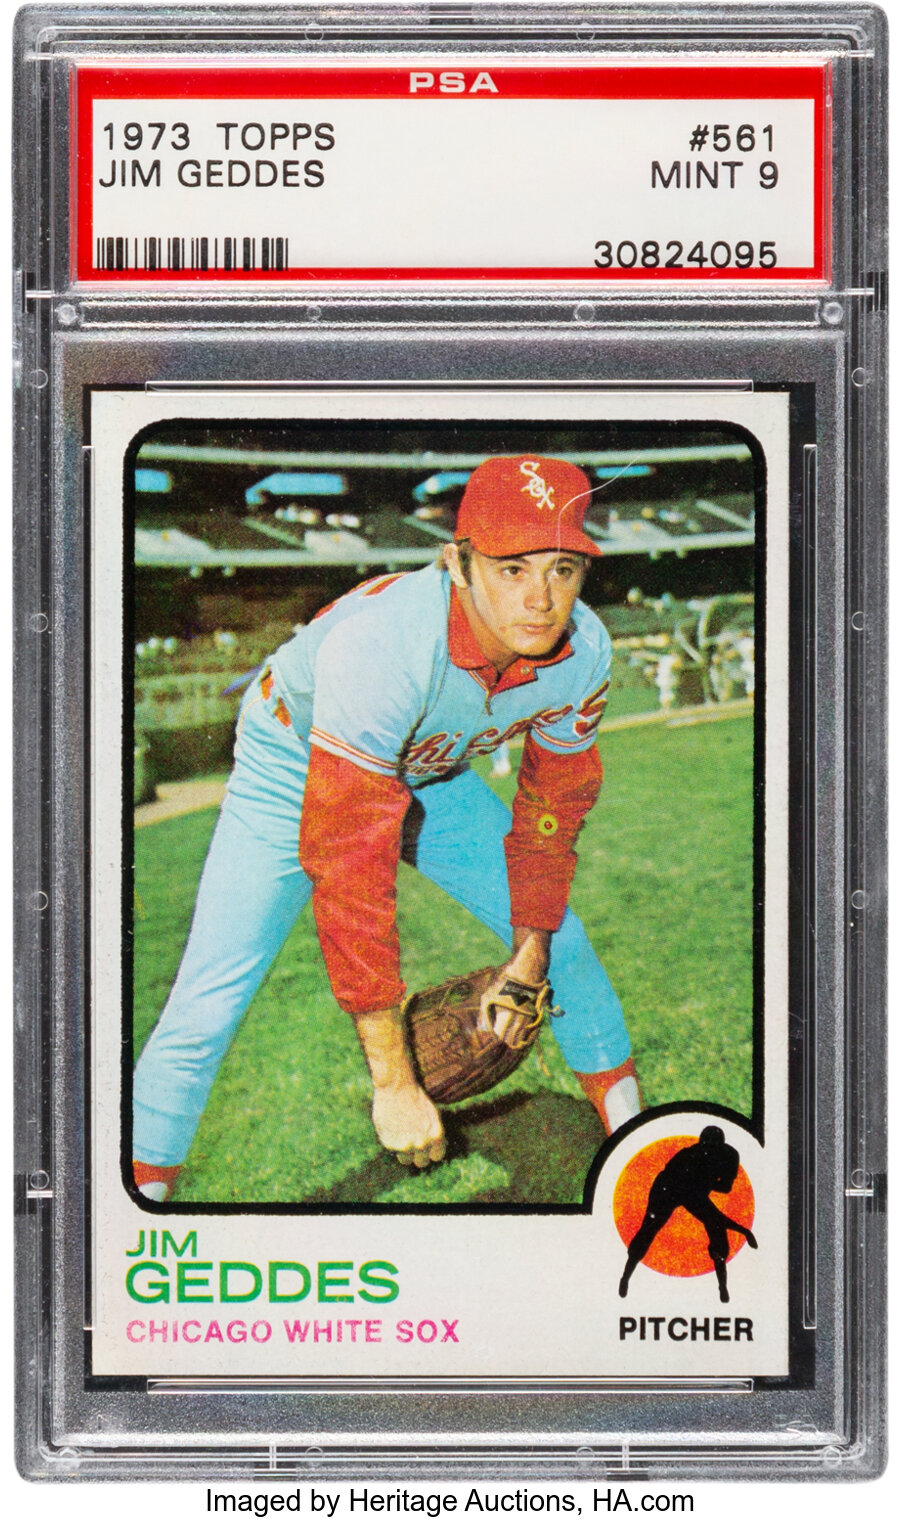 1973 Topps Jim Geddes #561 PSA Mint 9 - Only One Higher!